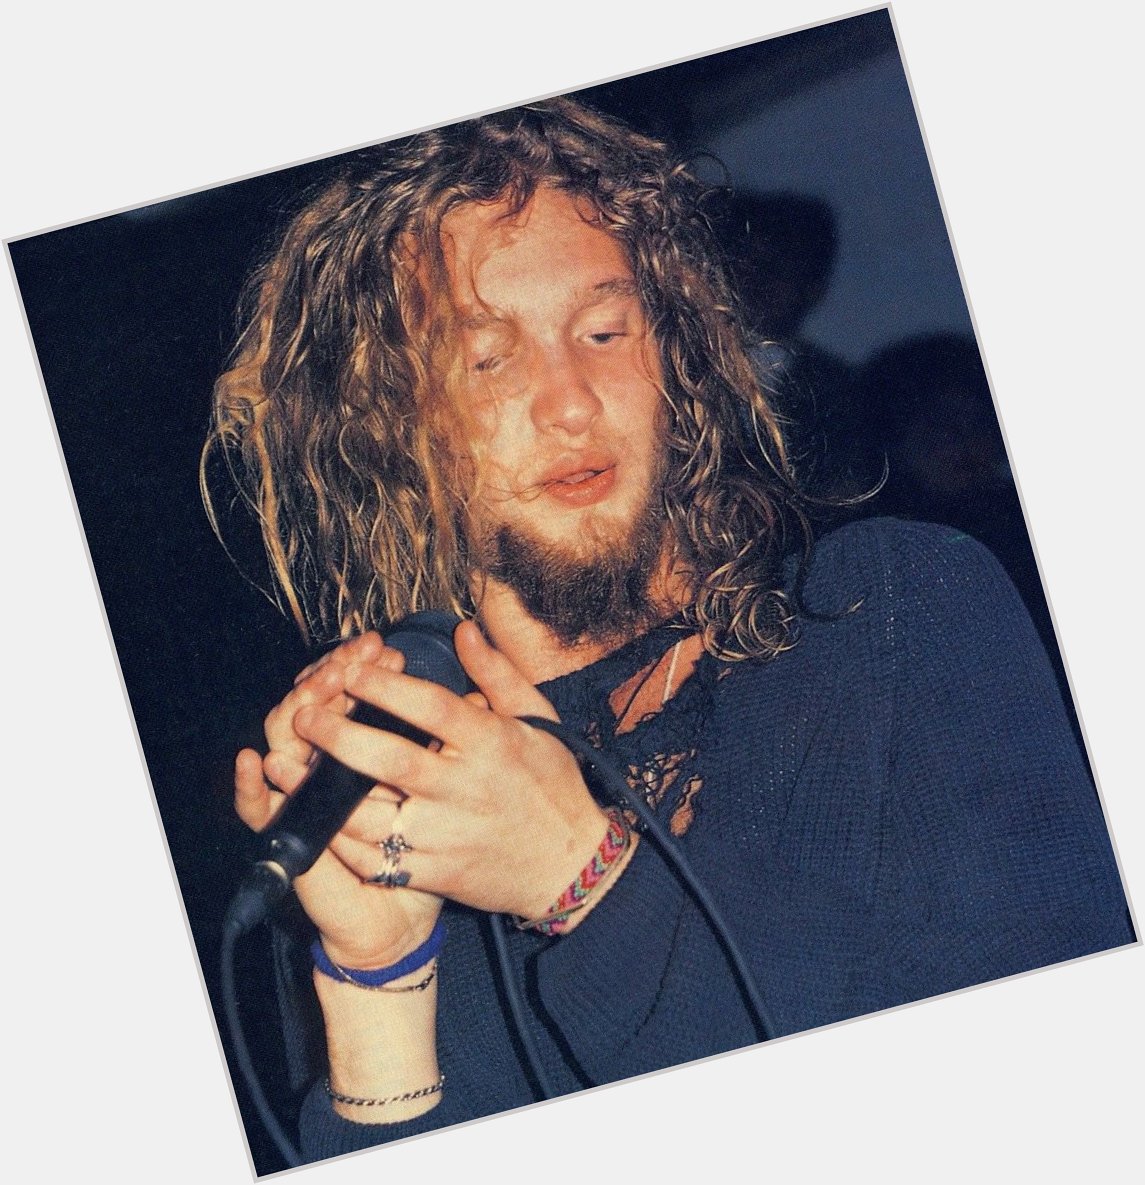 Happy birthday to my favorite singer of all time, Layne Staley. 